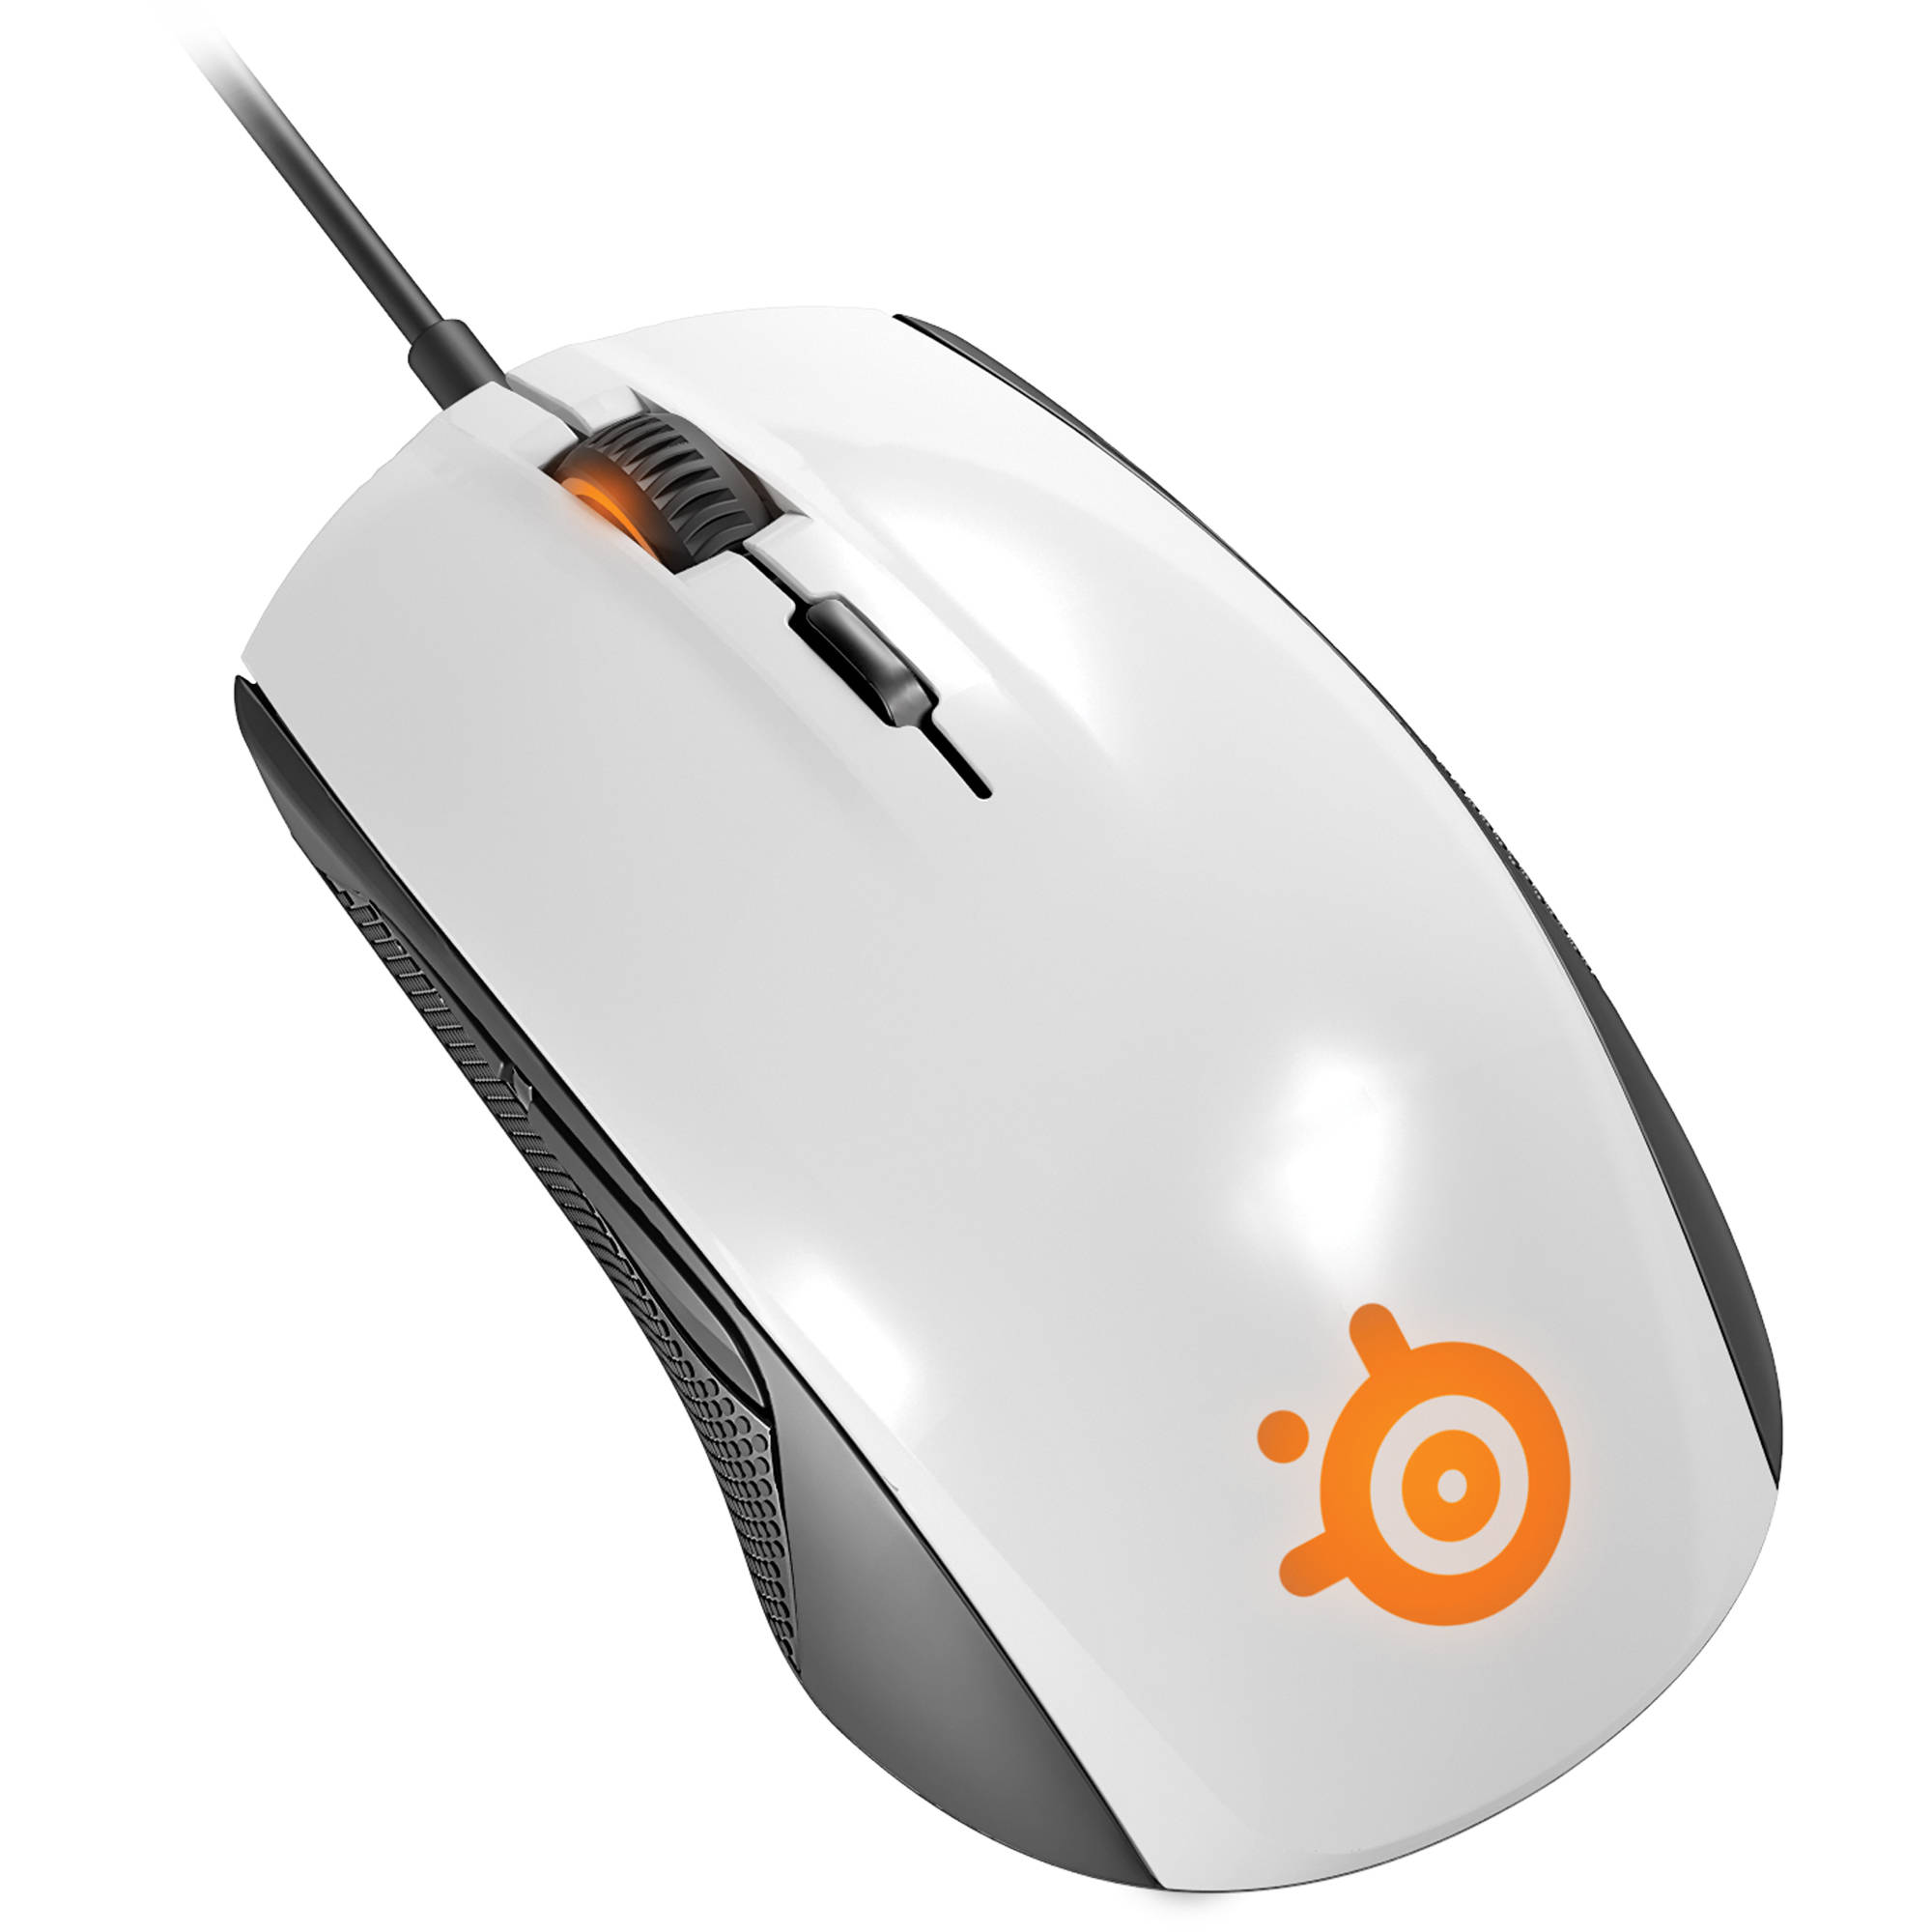 SteelSeries Rival 100 Optical Gaming Mouse (White) 62335 B&H